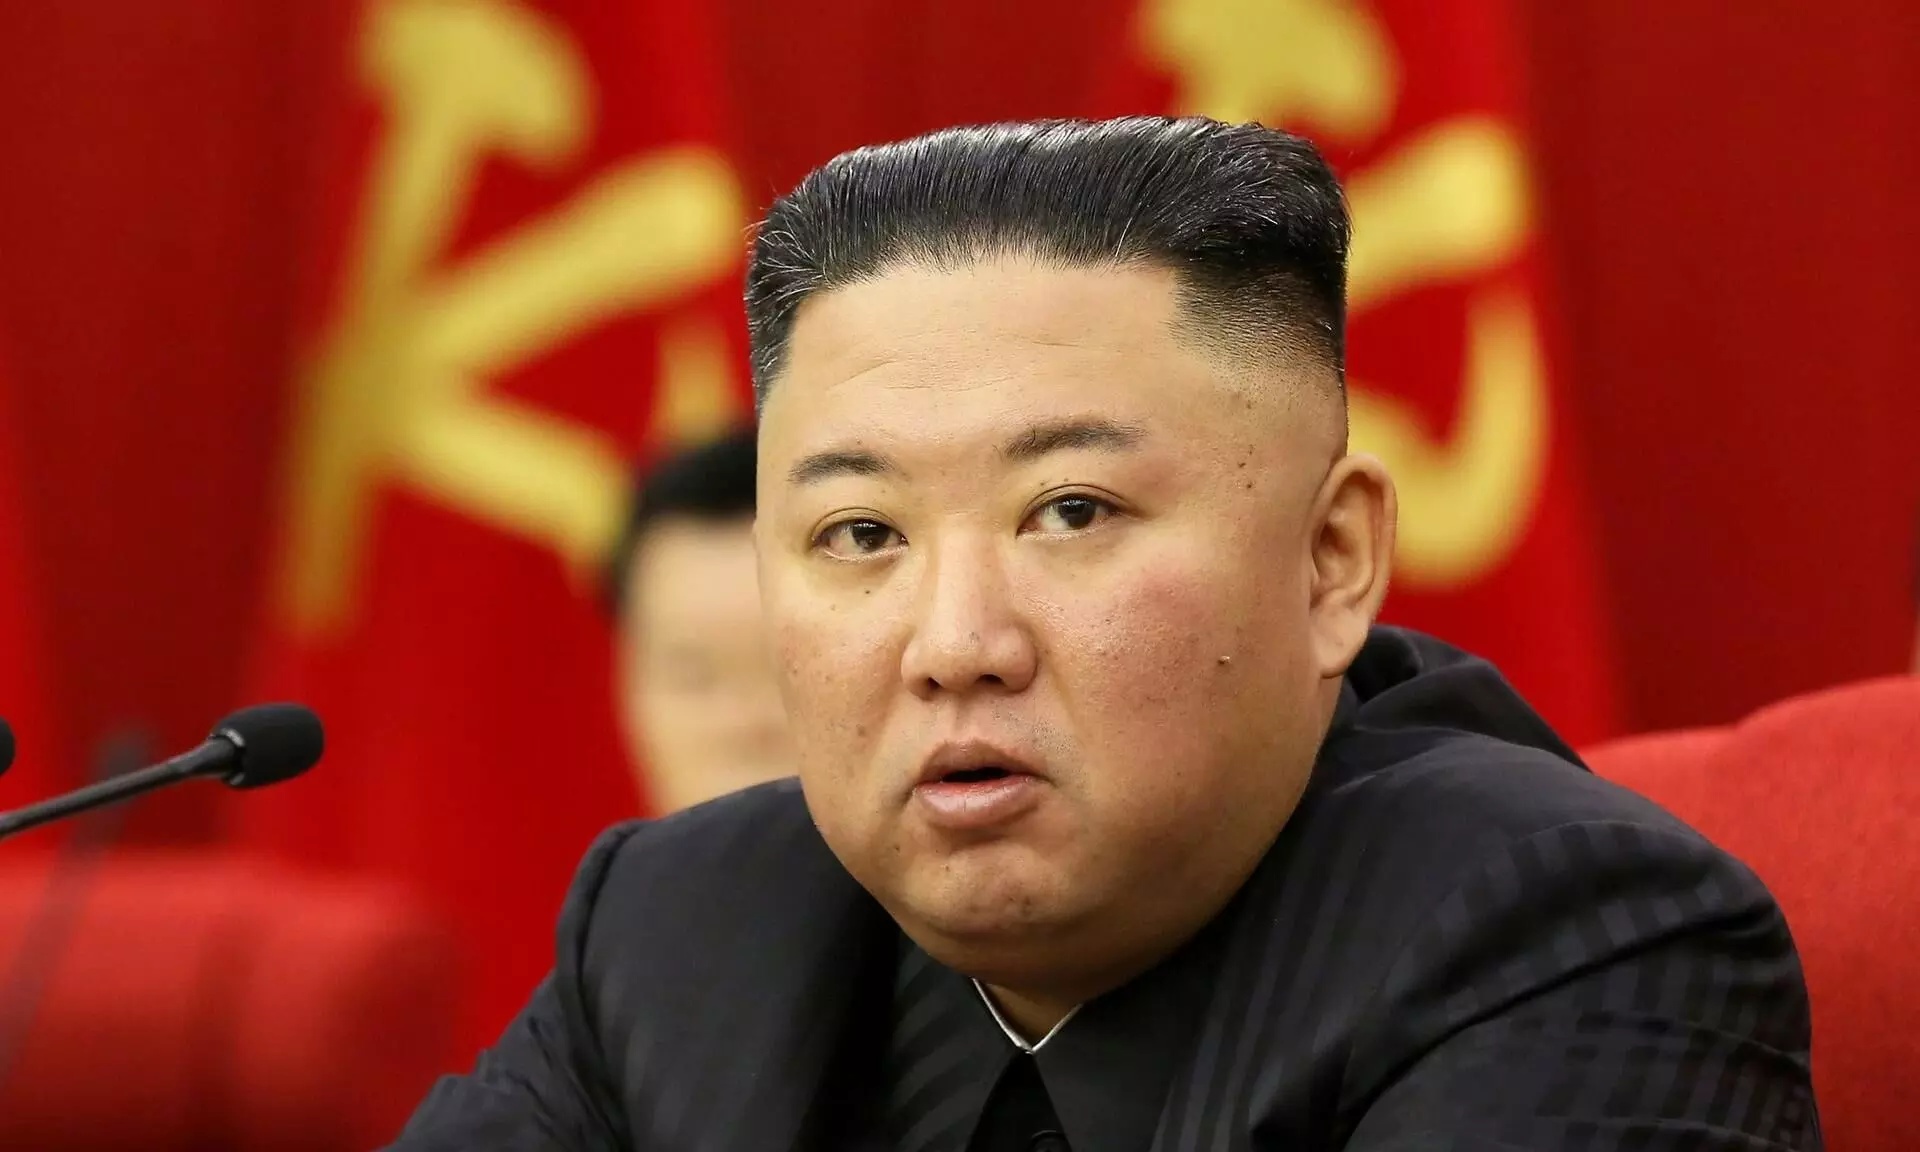 N.Korea worked on nuclear weapons despite sanctions: report